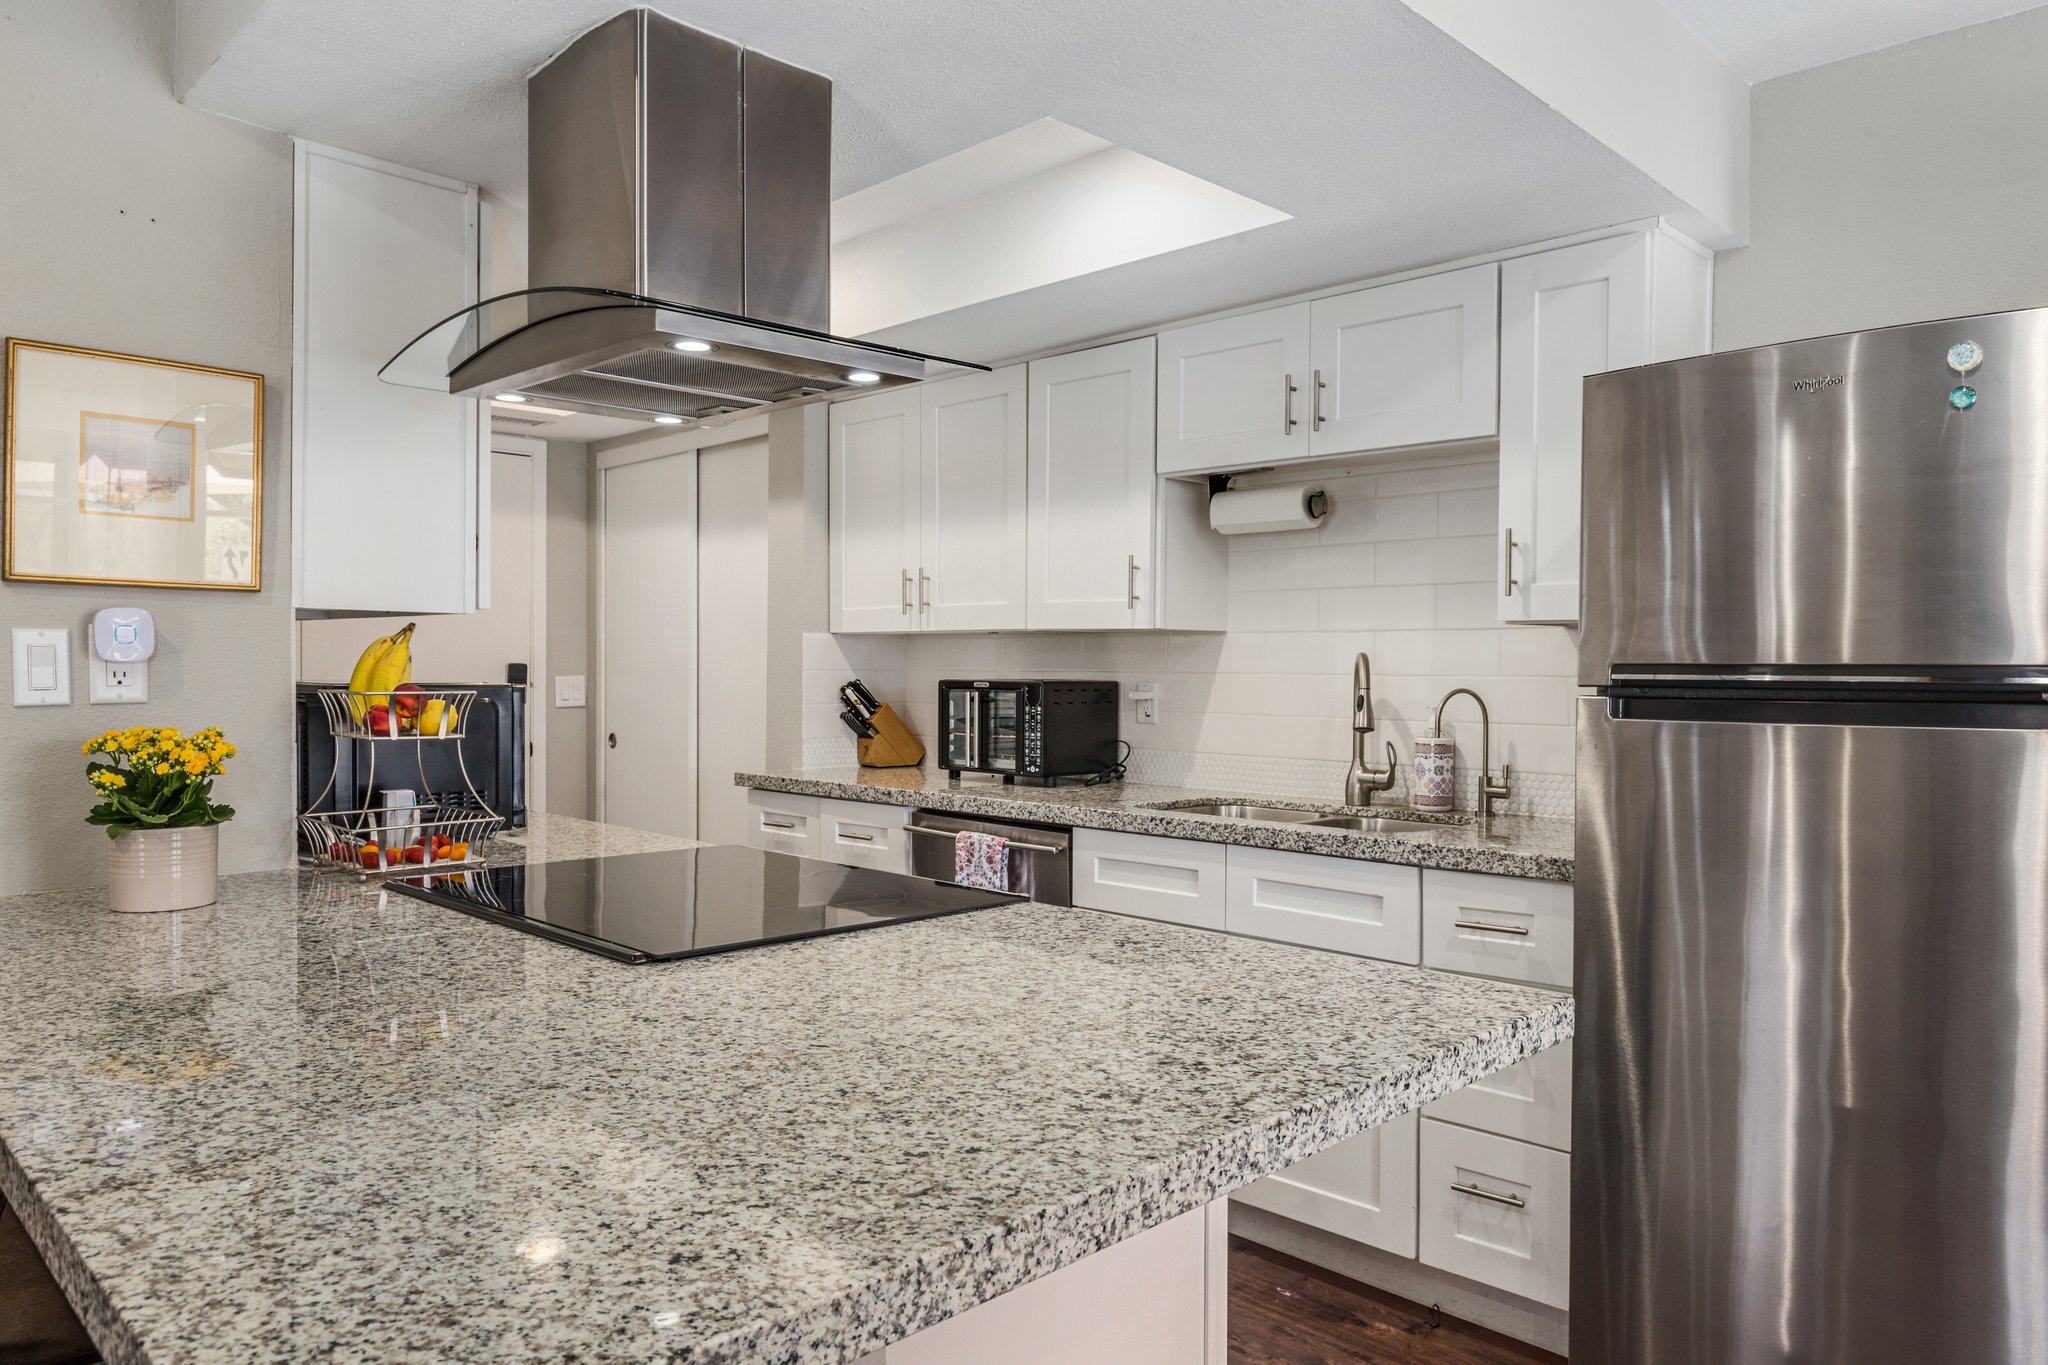 Awesome remodeled kitchen in this Pointe Tapatio home